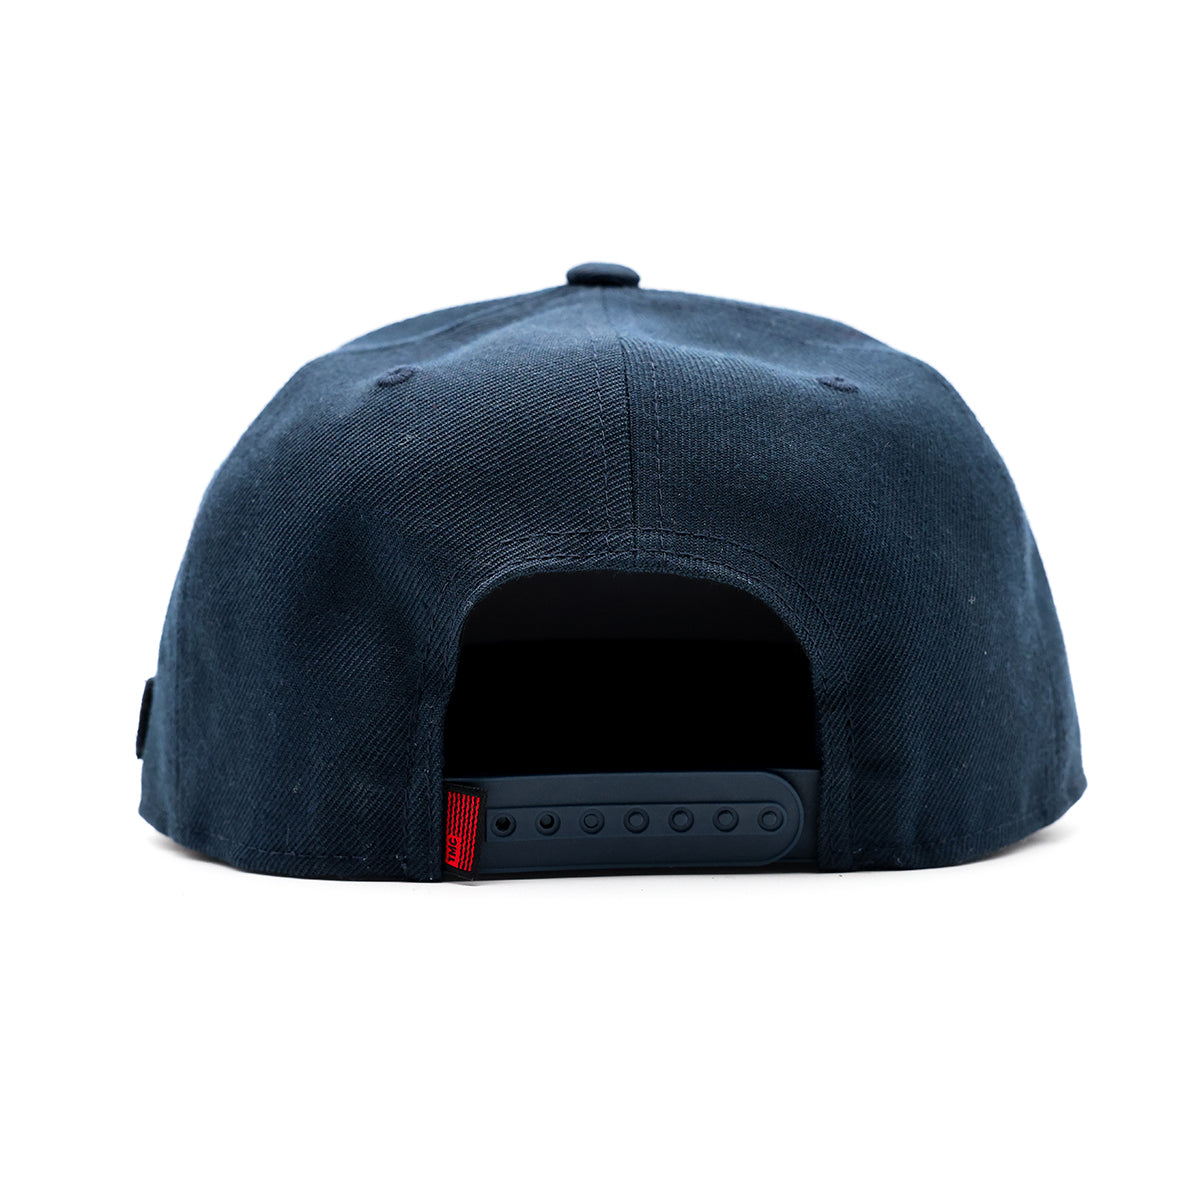 Victory Lap Limited Edition Snapback - Navy/White - Back